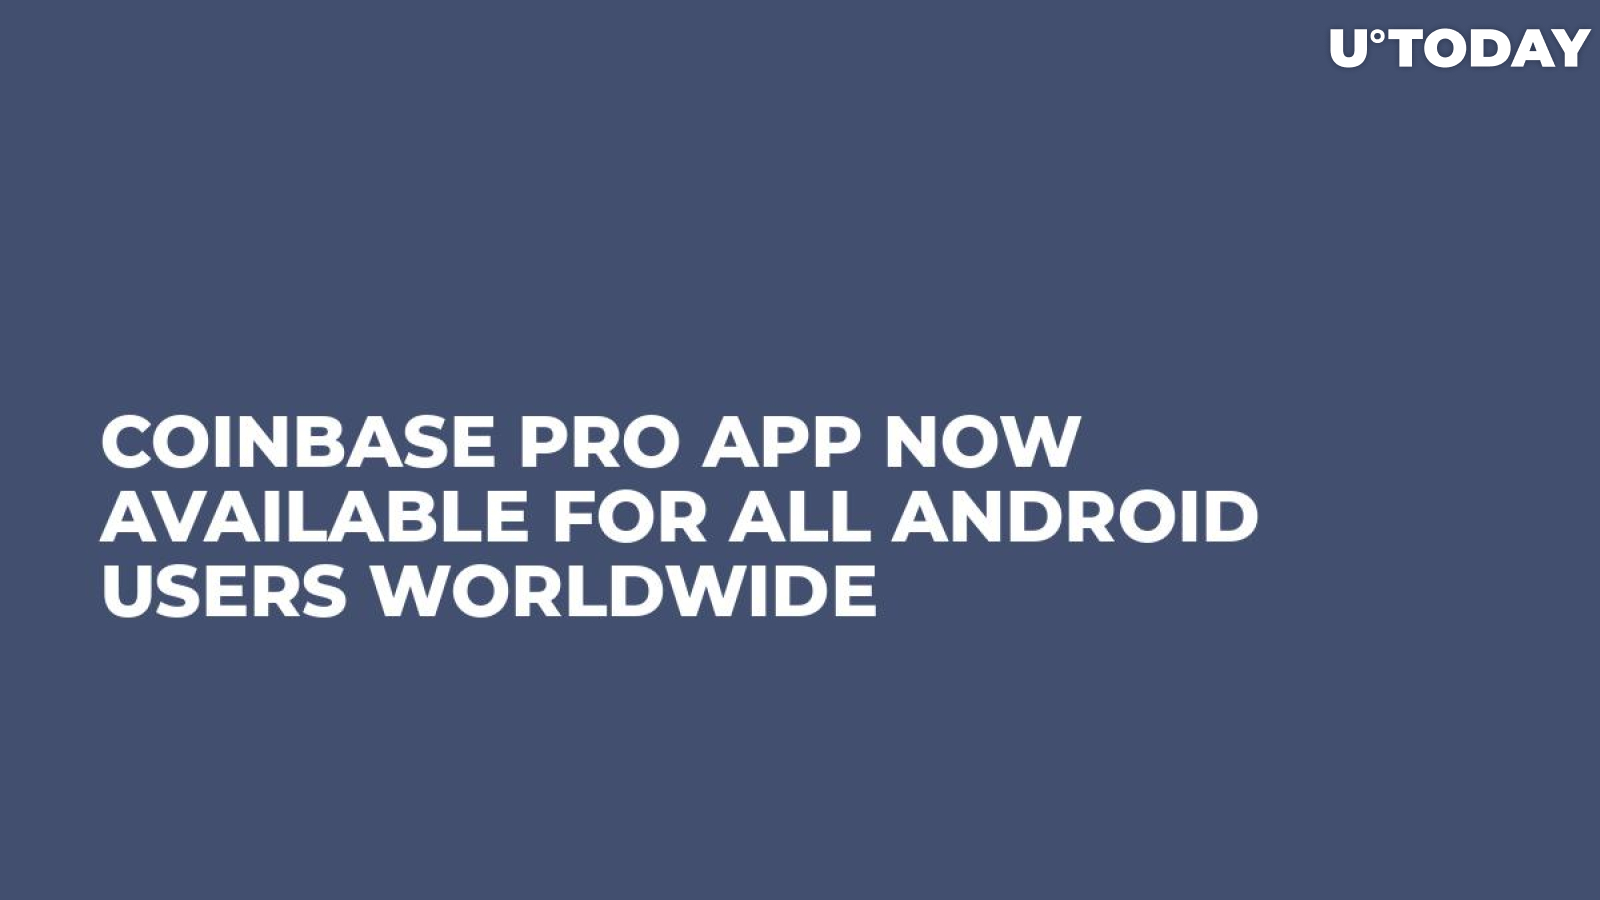 Coinbase Pro App Now Available for All Android Users Worldwide